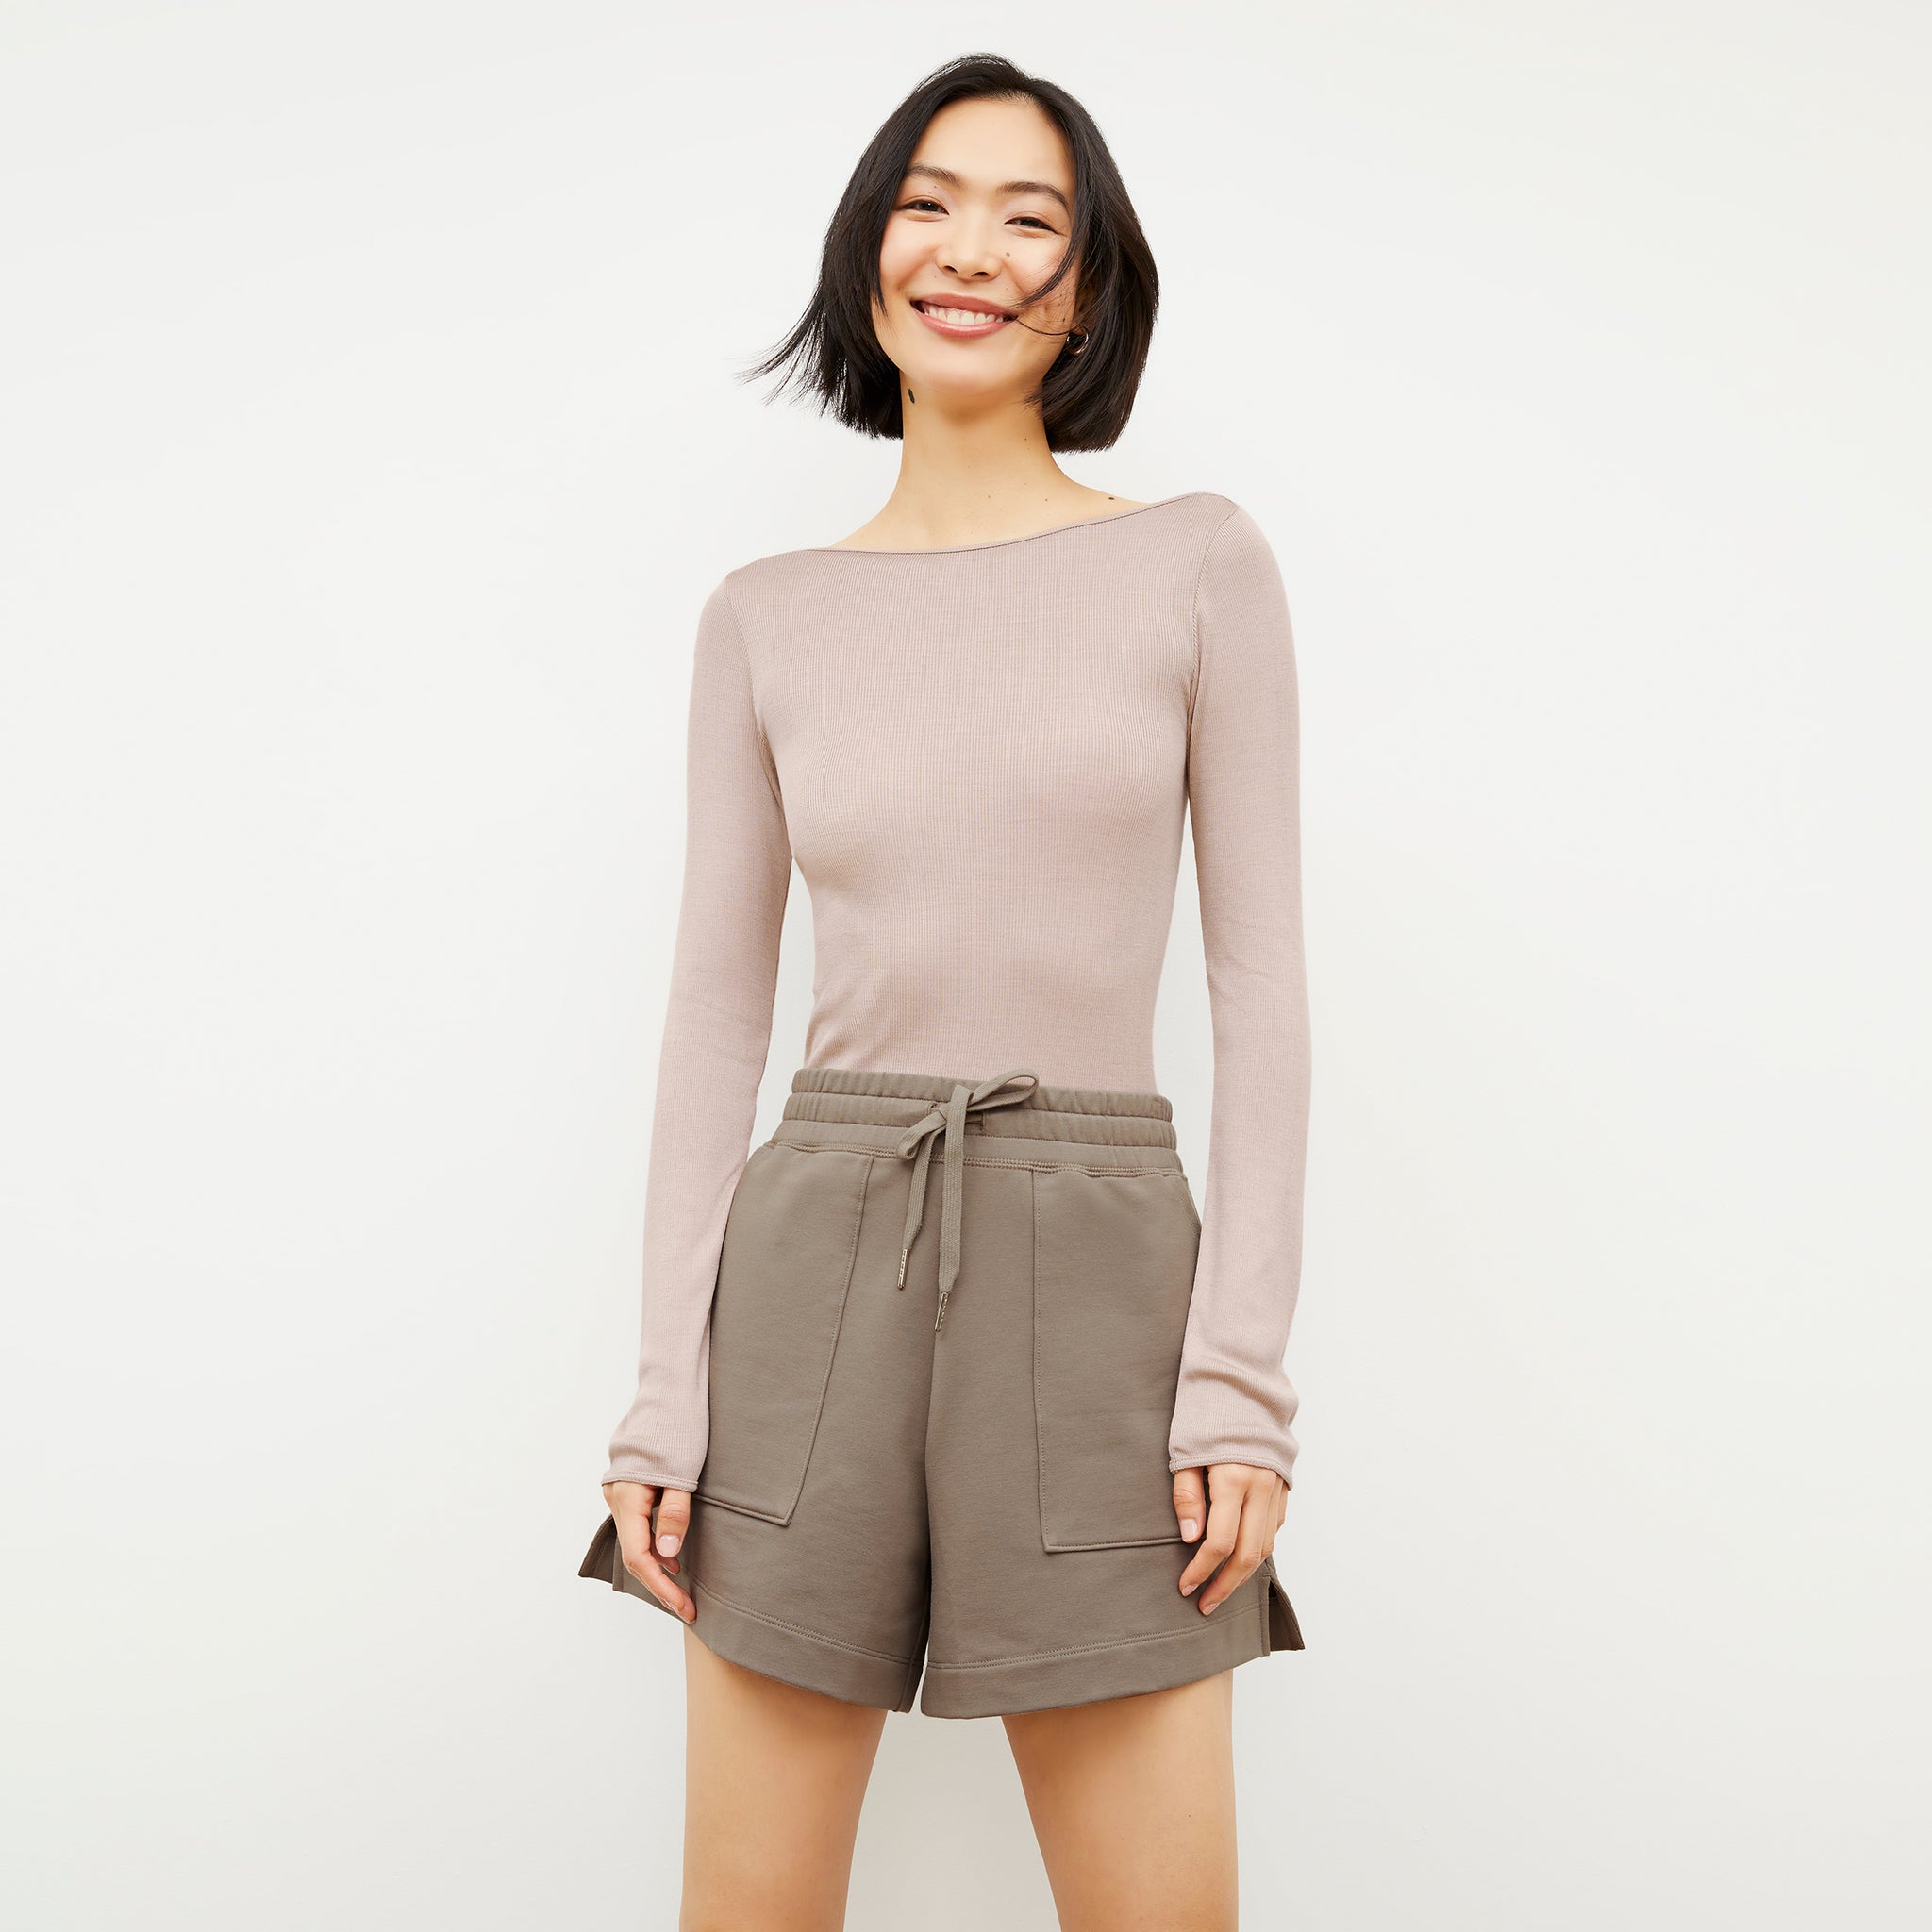 Front image of a woman wearing the Felix Short - Light French Terry in Light Truffle 